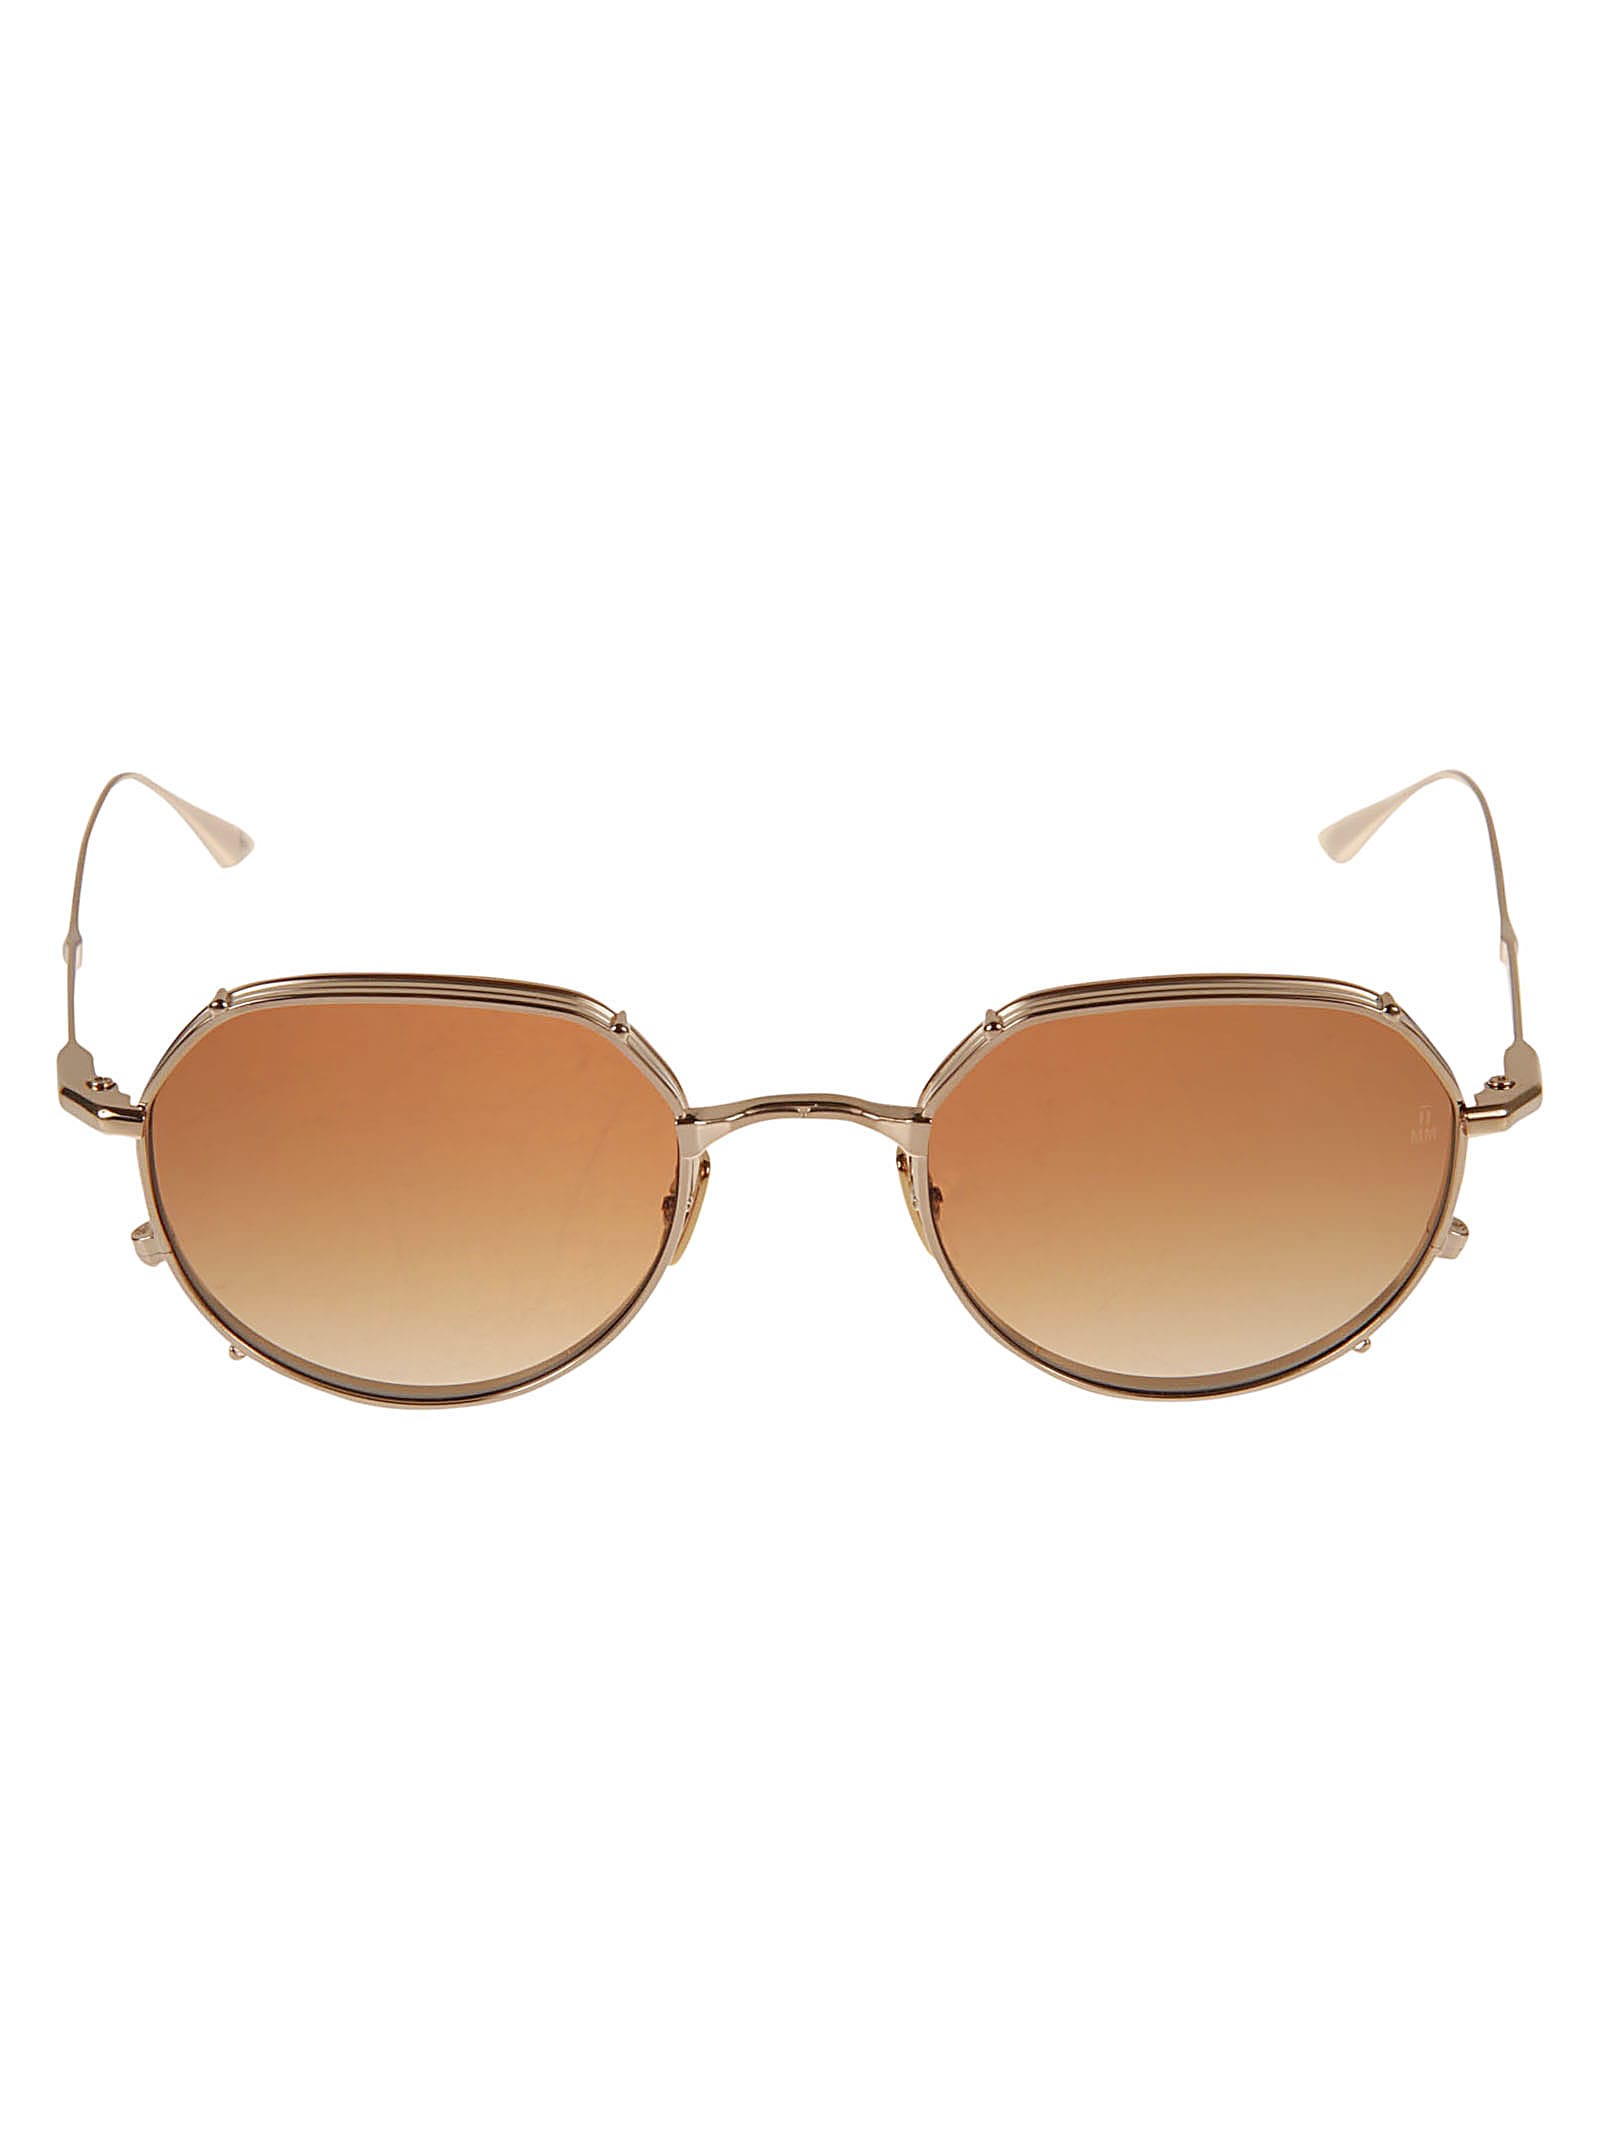 Jacques Marie Mage Studded Round Lens Sunglasses